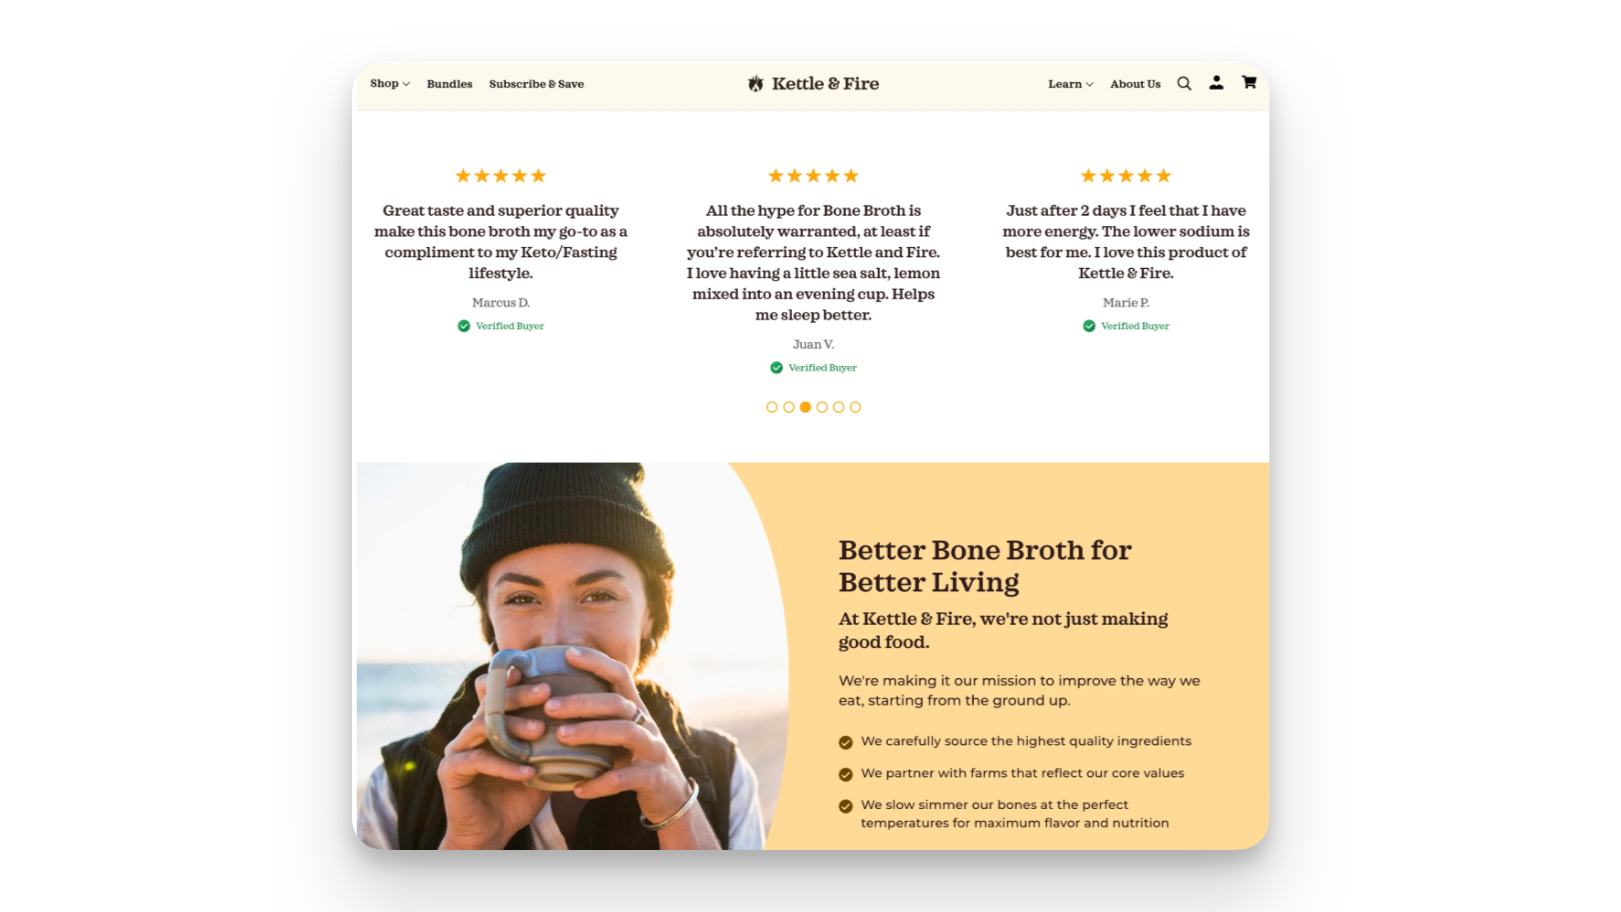 Kettle & Fire adds Verified Buyer labels to reviews to build trust with shoppers